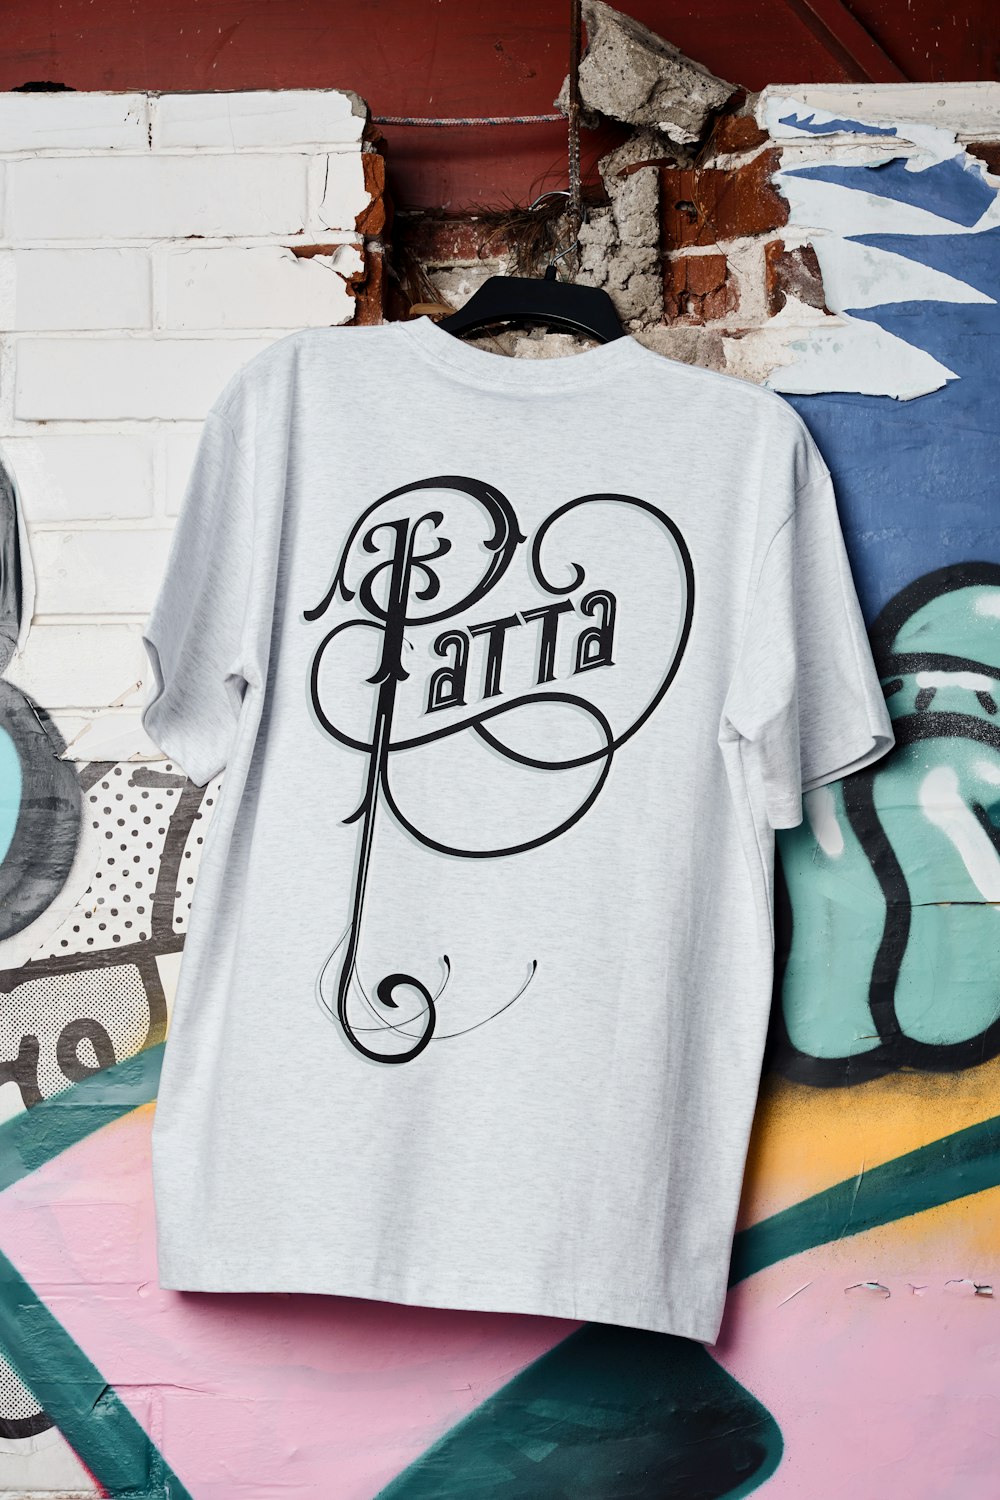 a t - shirt hanging on a wall with graffiti